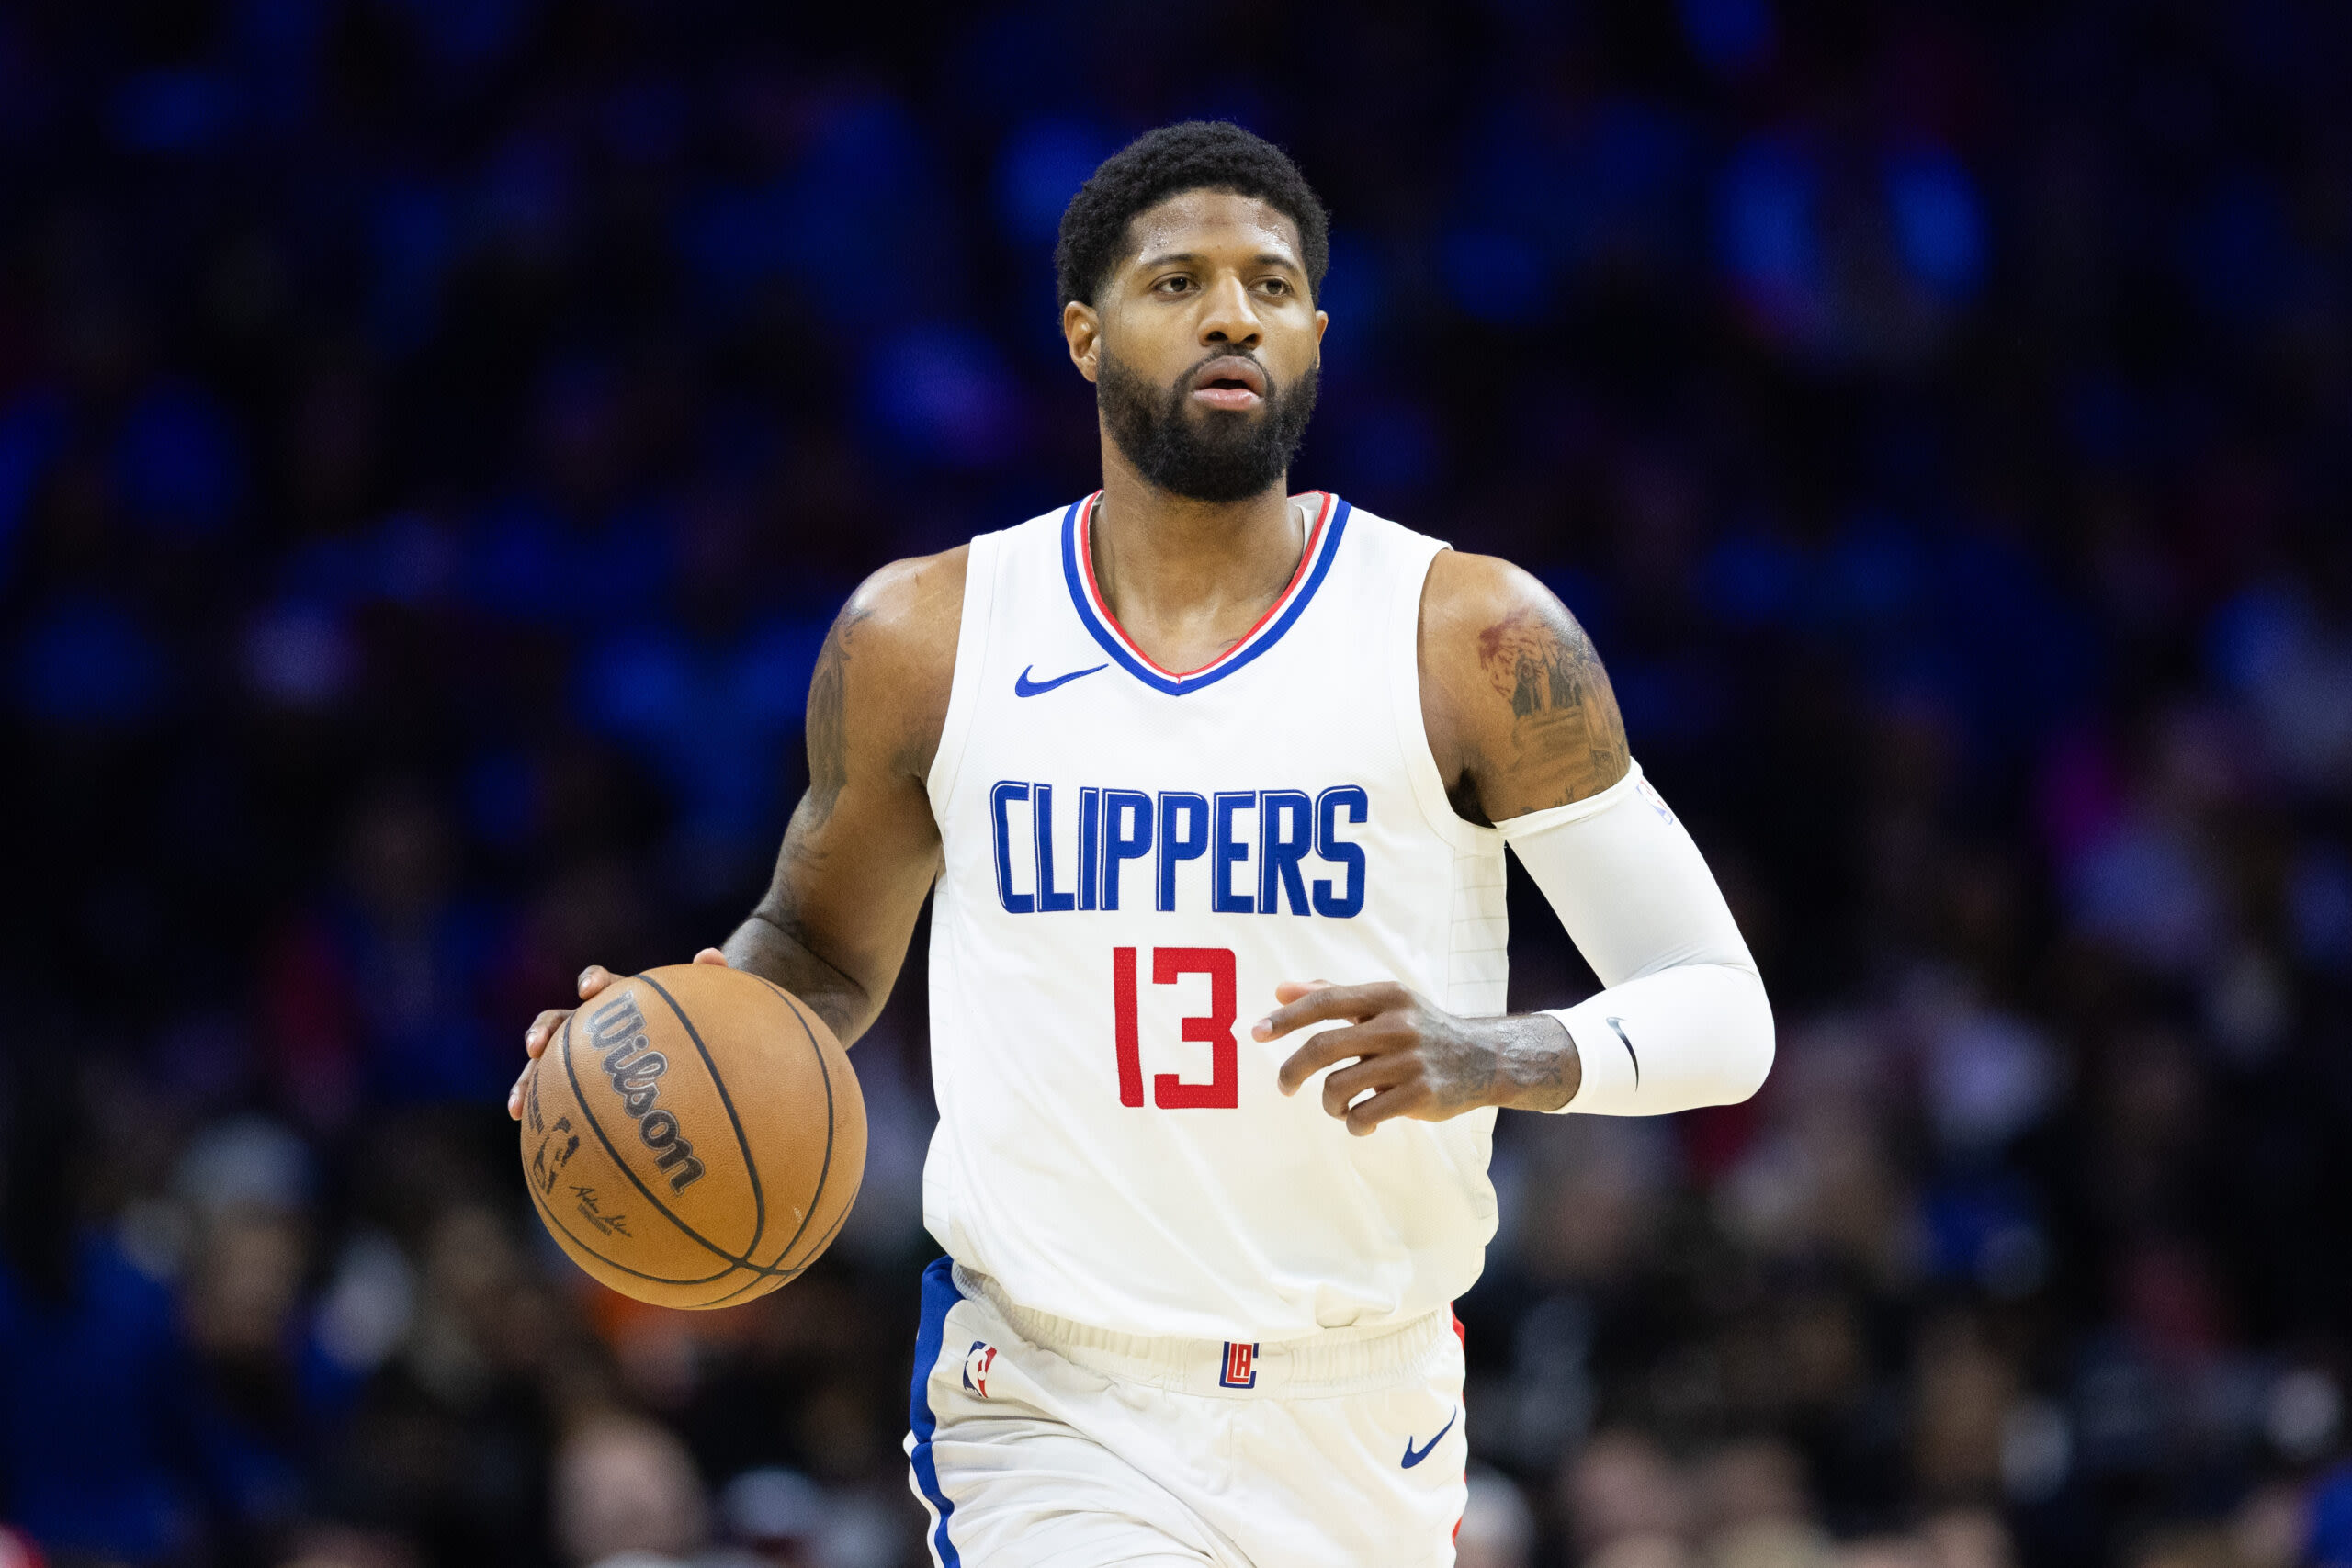 ESPN’s Jay Williams believes Paul George should play with Sixers